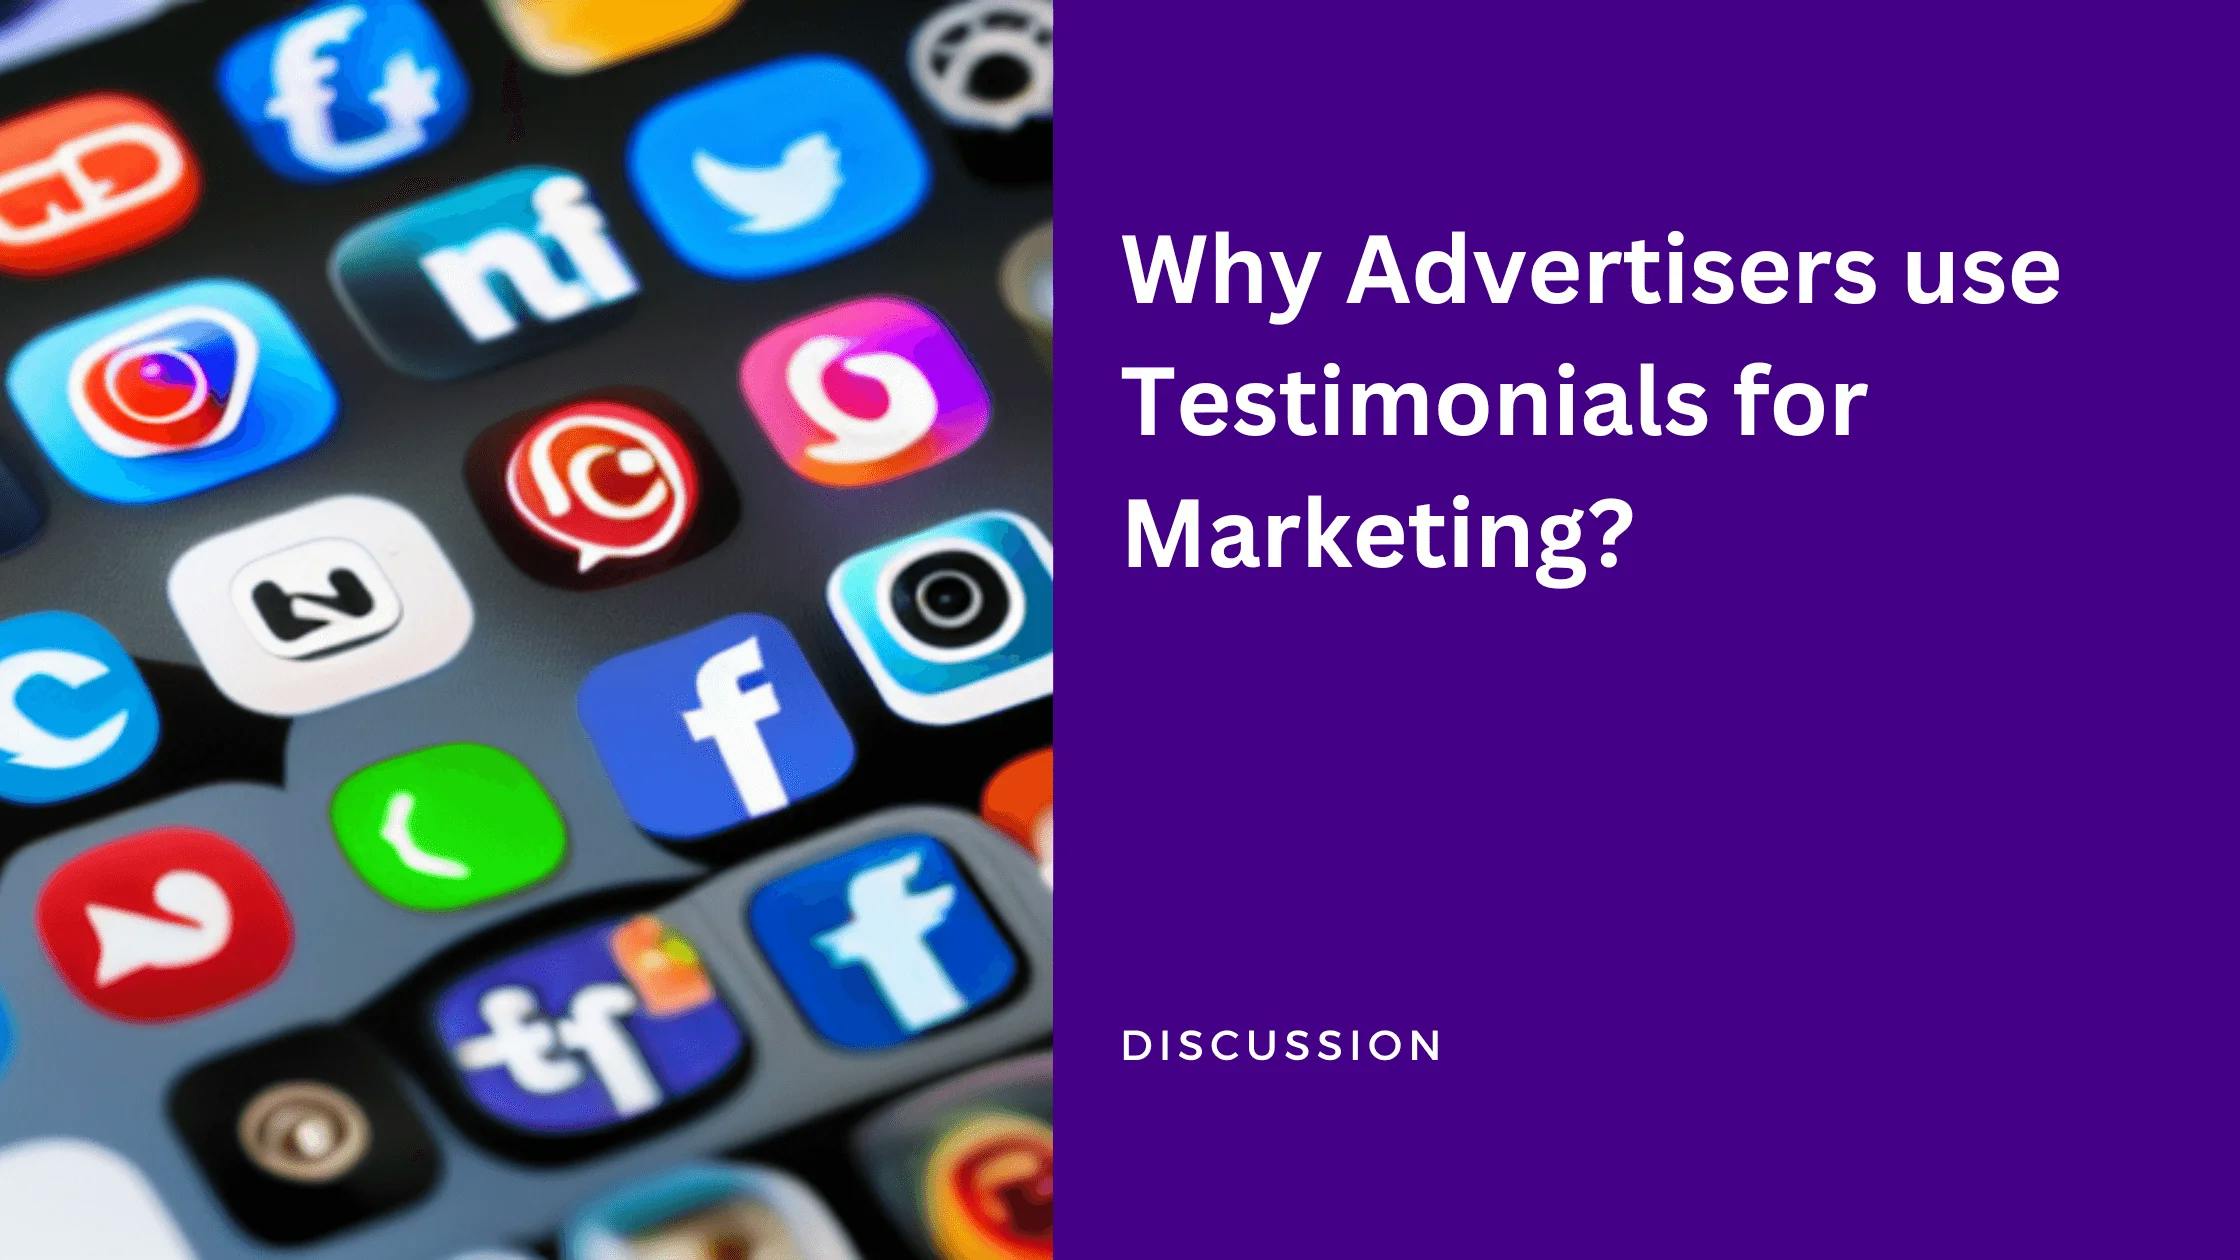 Why Do Advertisers use Testimonials for Marketing?